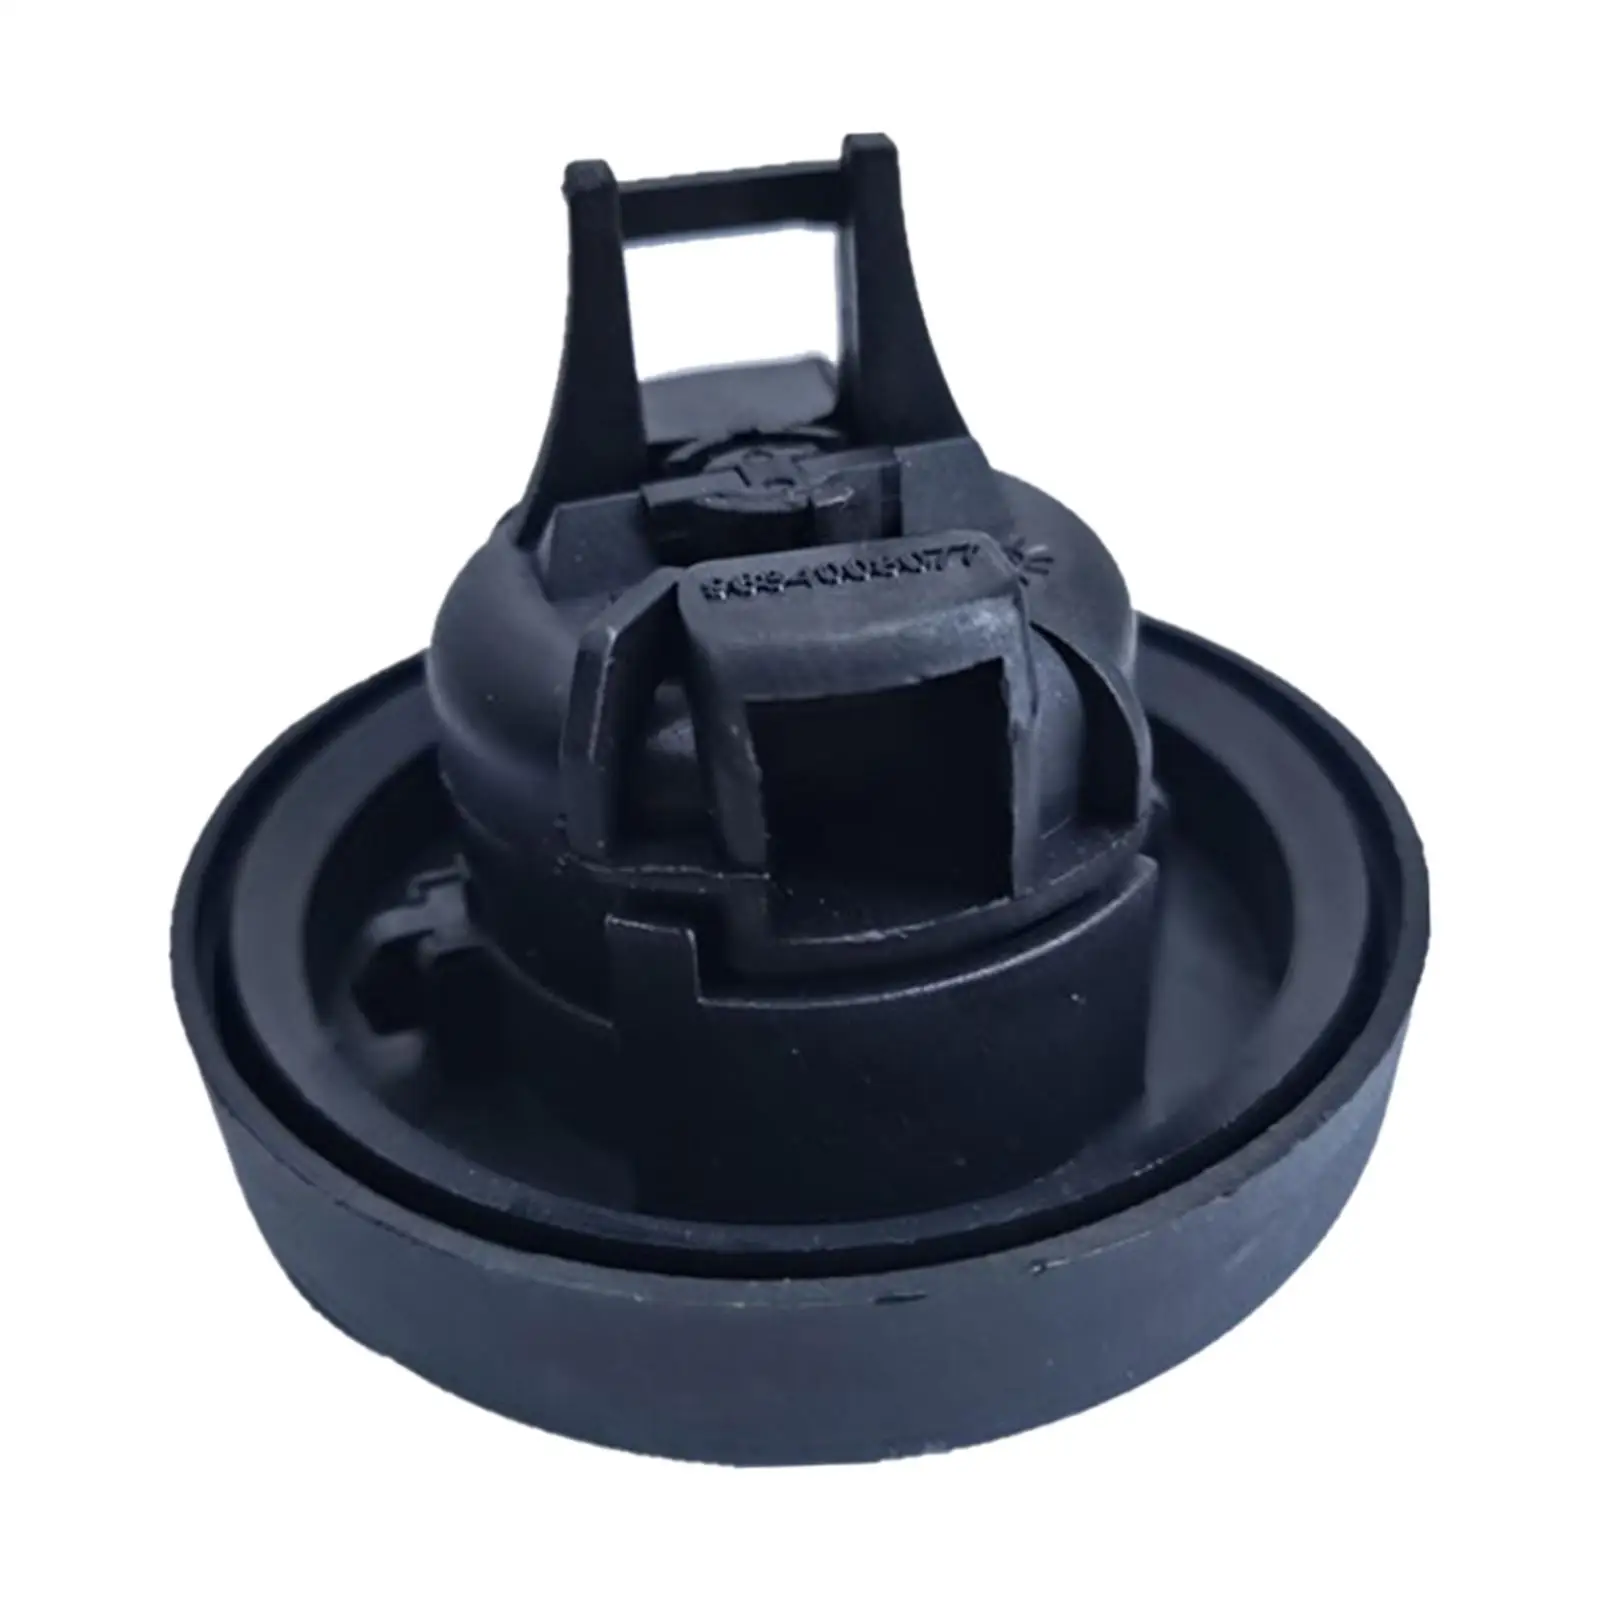 Car Fuel Gas Cap Replaces Oil Tank Cover Car Accessories 1508G0 Gas Oil Filler Plug Cover for Peugeot Expert 3